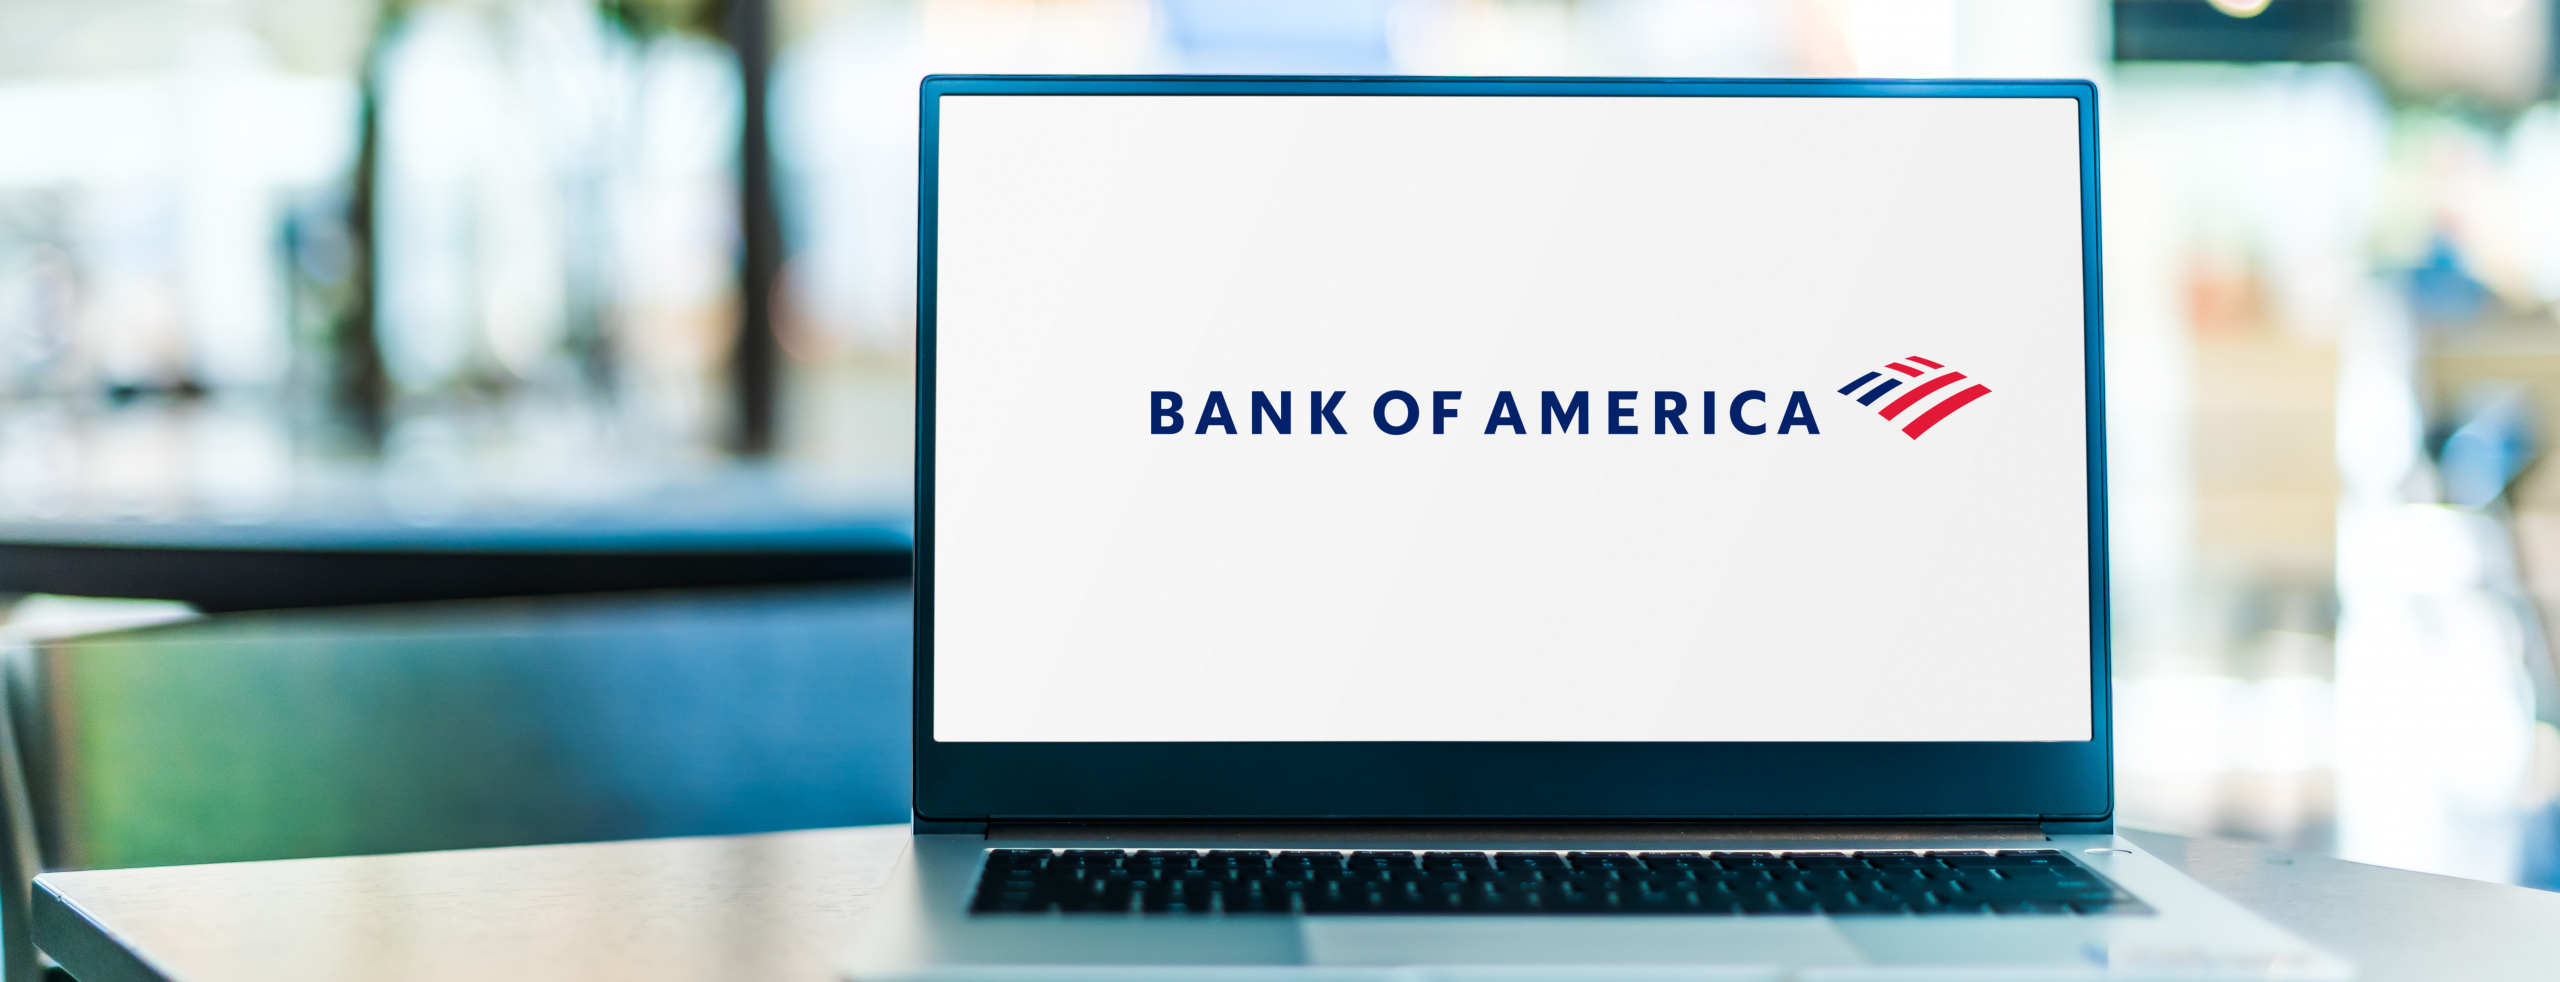 Bank of America Research: Crypto Market Sentiment Remains Positive
